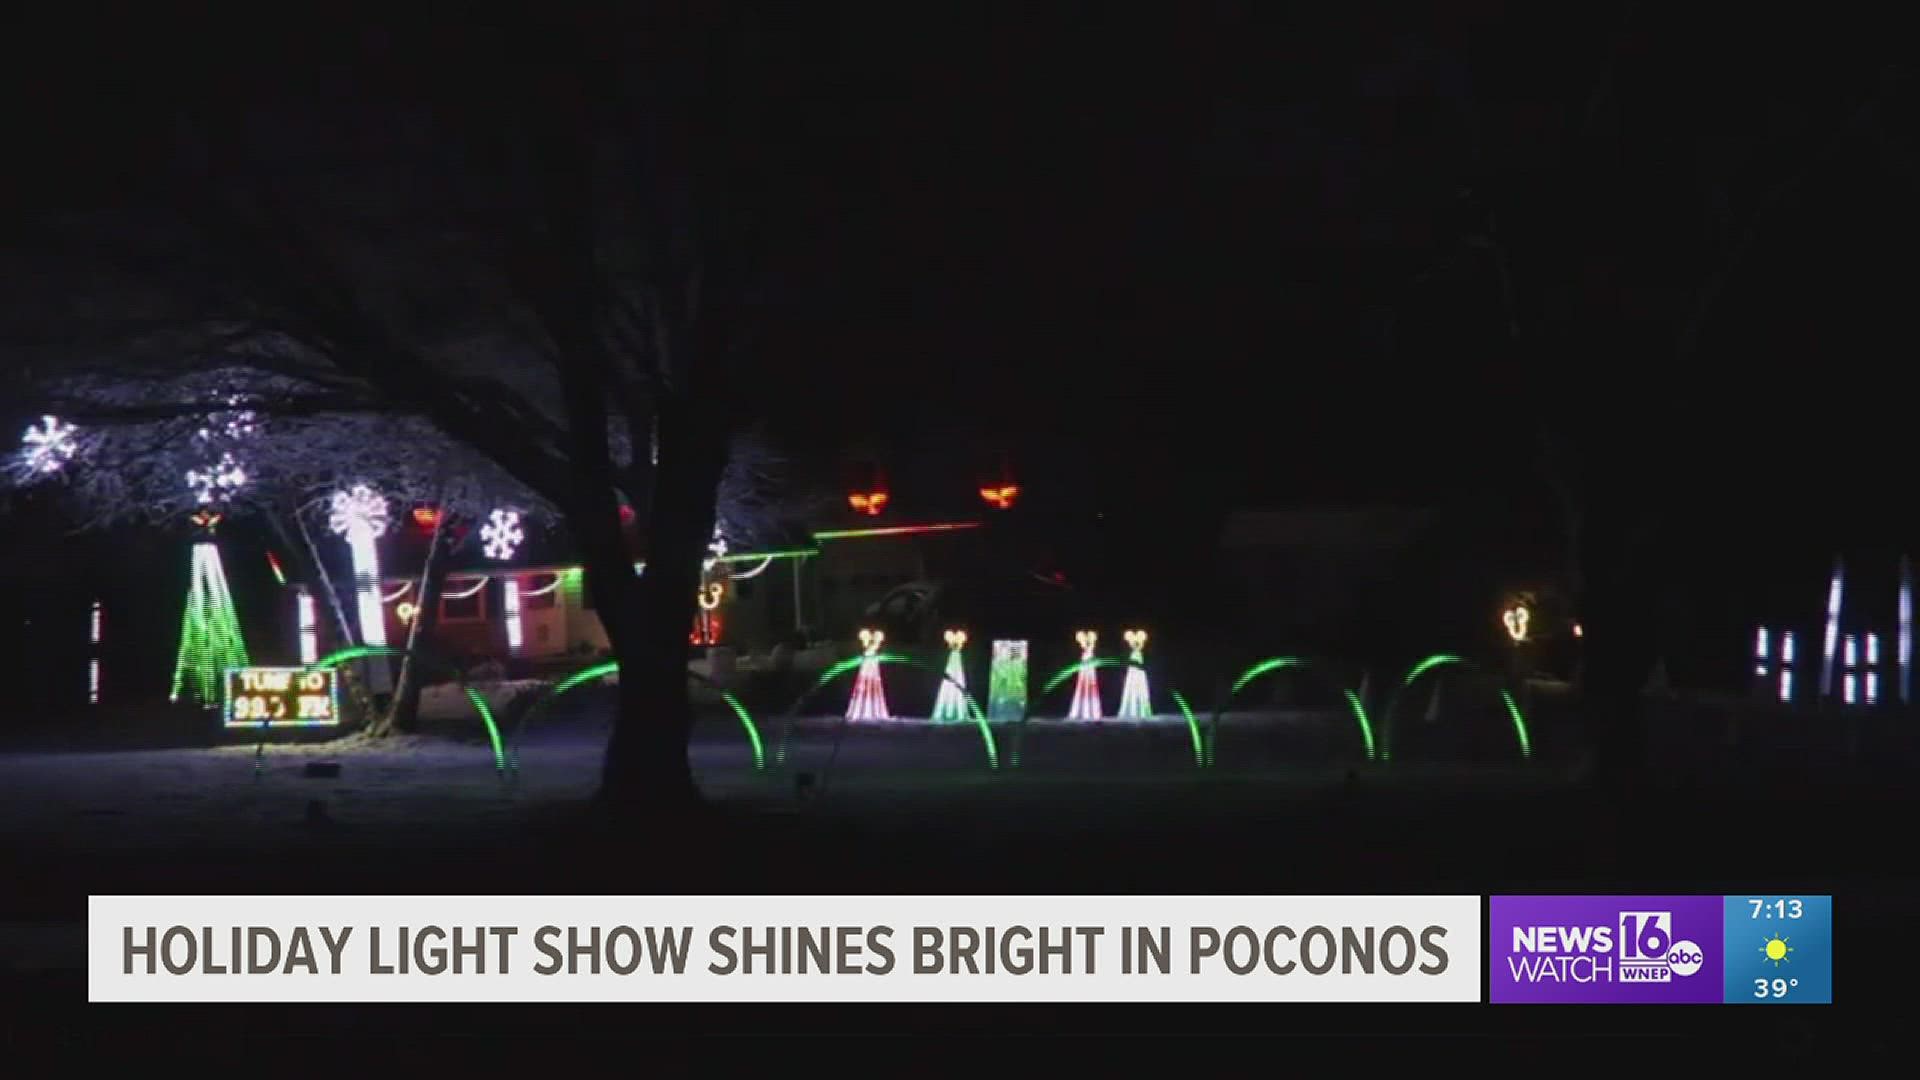 The New year's light show runs through the middle of January weather permitting.